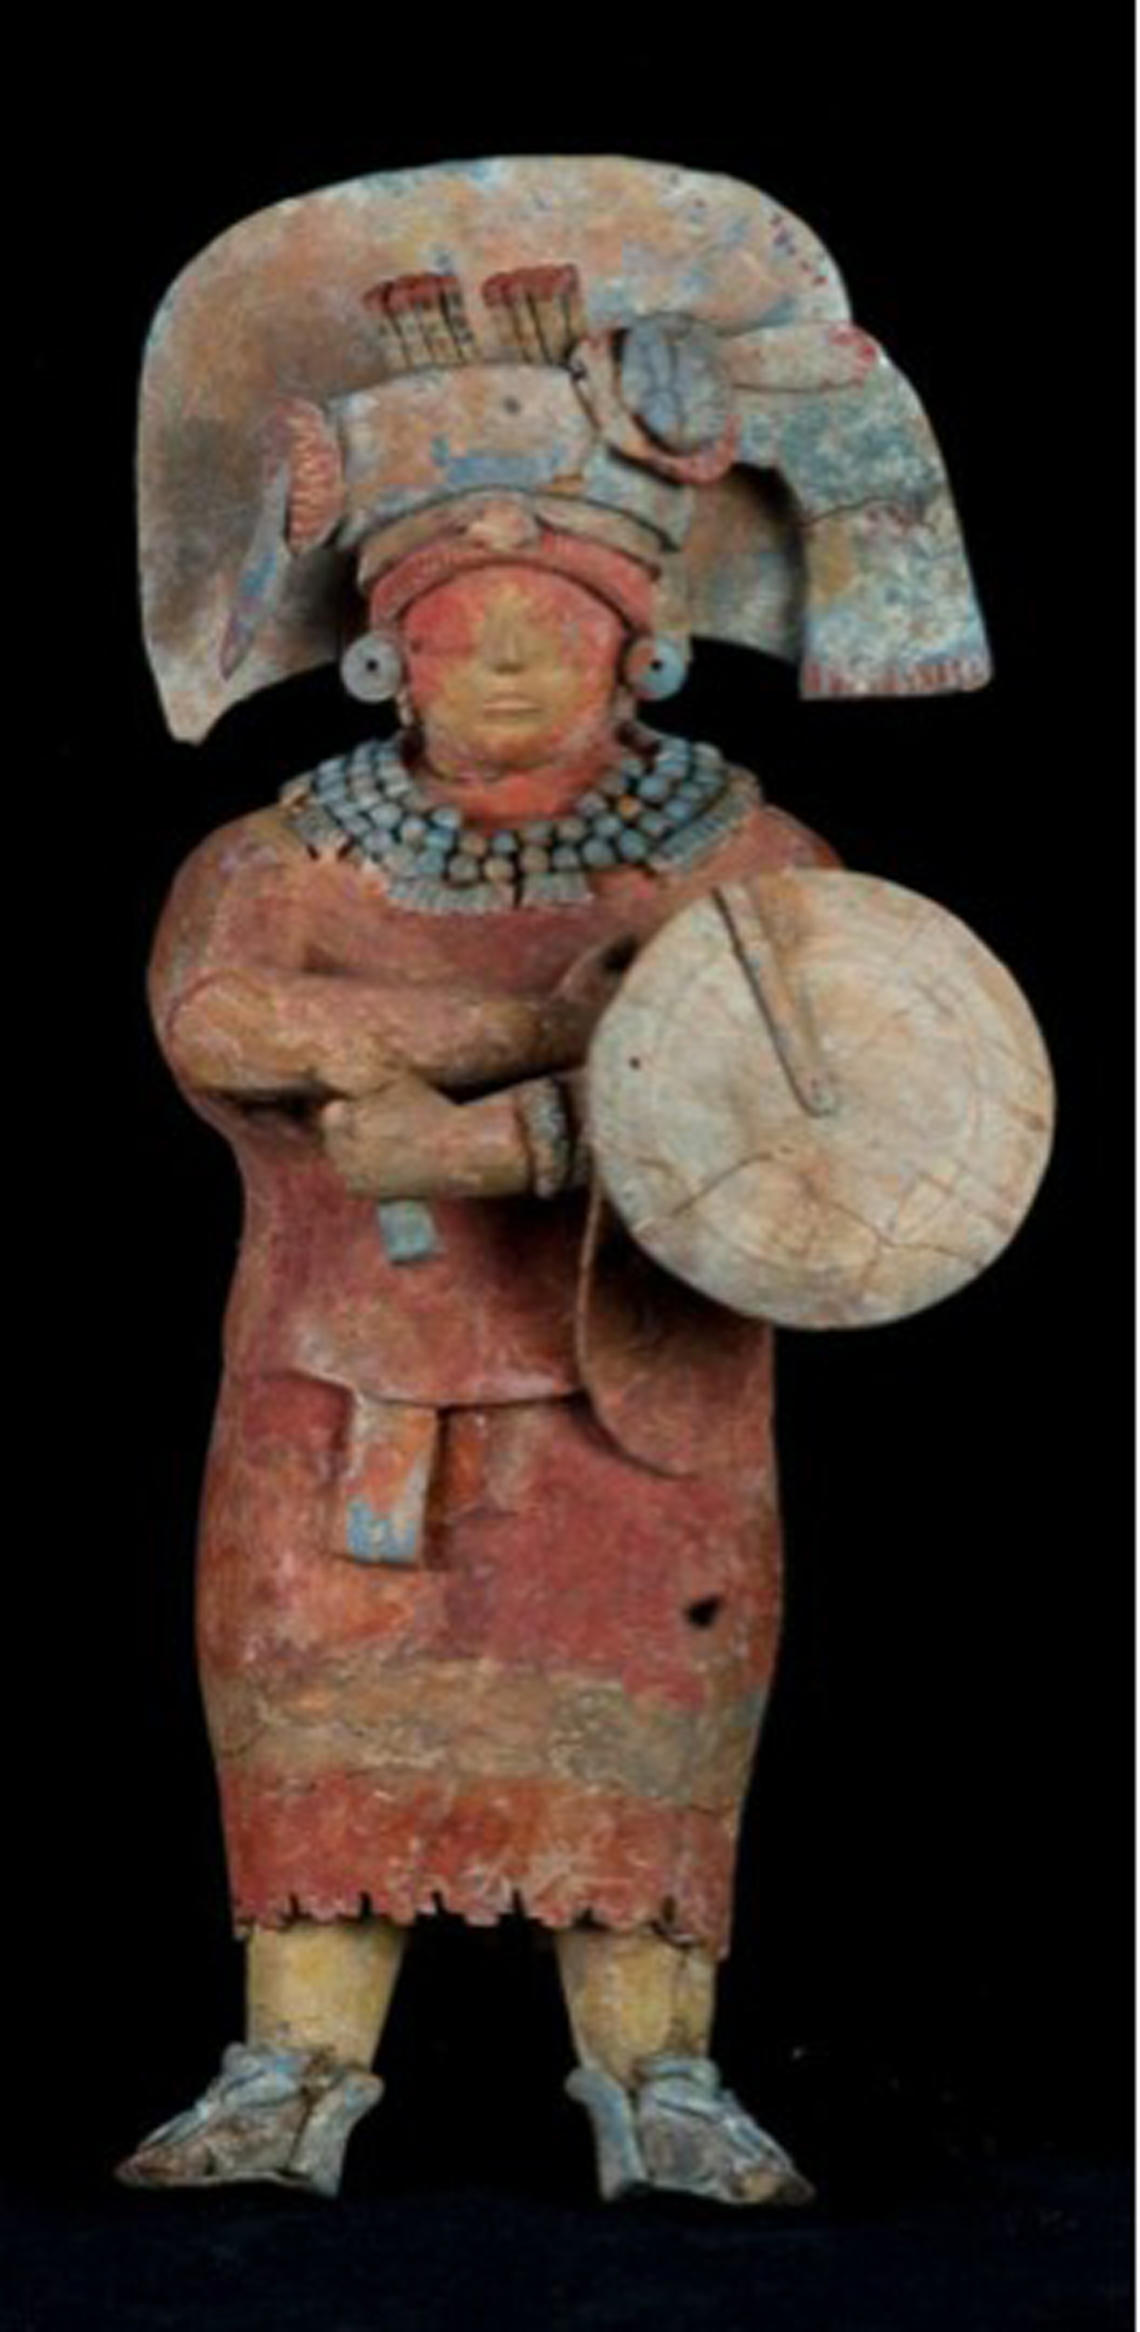 A restored figurine, discovered in 2006 in the ancient remains of a Maya city in Guatamela.